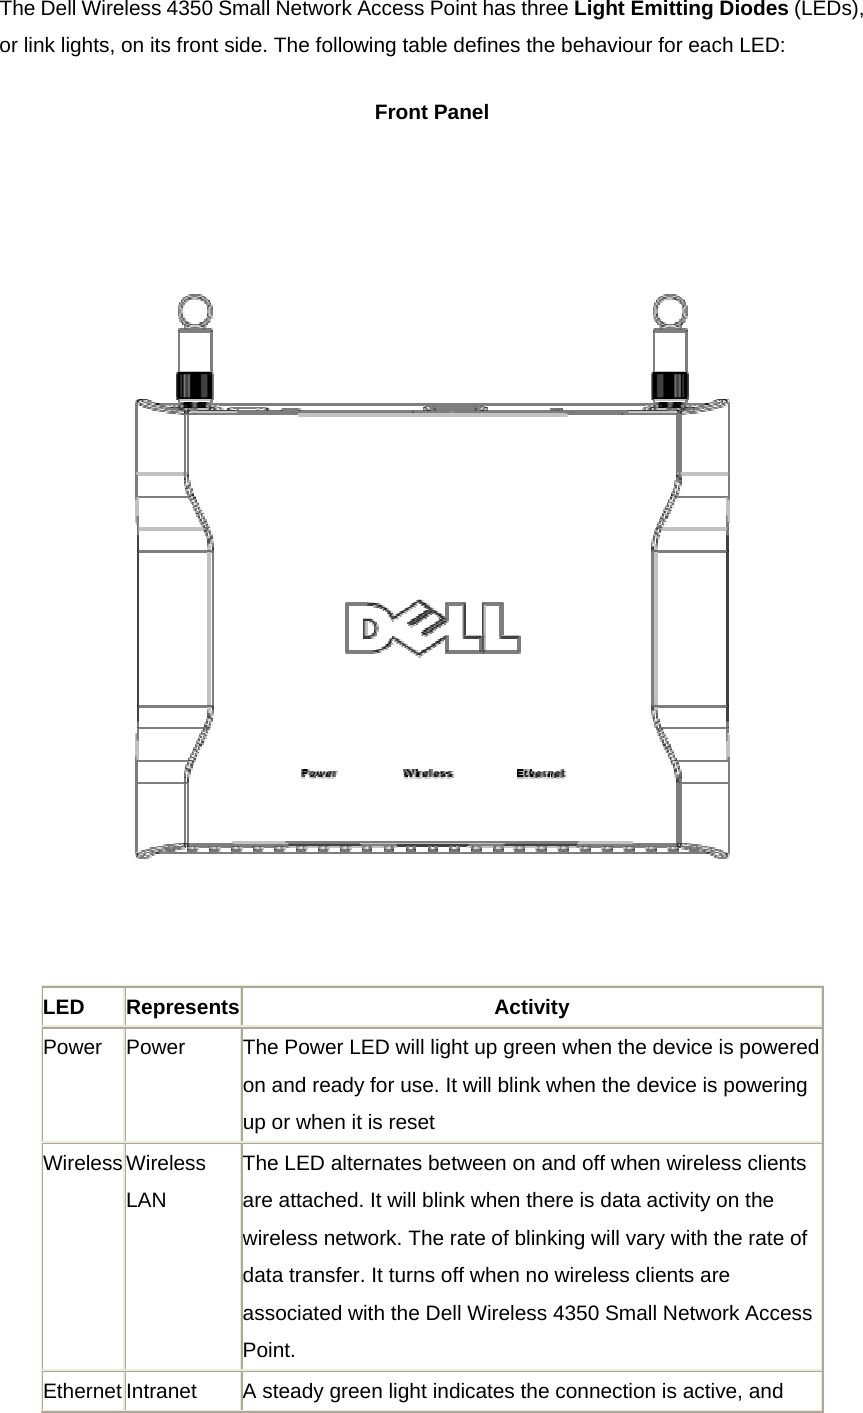 The Dell Wireless 4350 Small Network Access Point has three Light Emitting Diodes (LEDs), or link lights, on its front side. The following table defines the behaviour for each LED: Front Panel  LED Represents Activity Power  Power  The Power LED will light up green when the device is powered on and ready for use. It will blink when the device is powering up or when it is reset Wireless Wireless LAN The LED alternates between on and off when wireless clients are attached. It will blink when there is data activity on the wireless network. The rate of blinking will vary with the rate of data transfer. It turns off when no wireless clients are associated with the Dell Wireless 4350 Small Network Access Point. Ethernet Intranet    A steady green light indicates the connection is active, and 